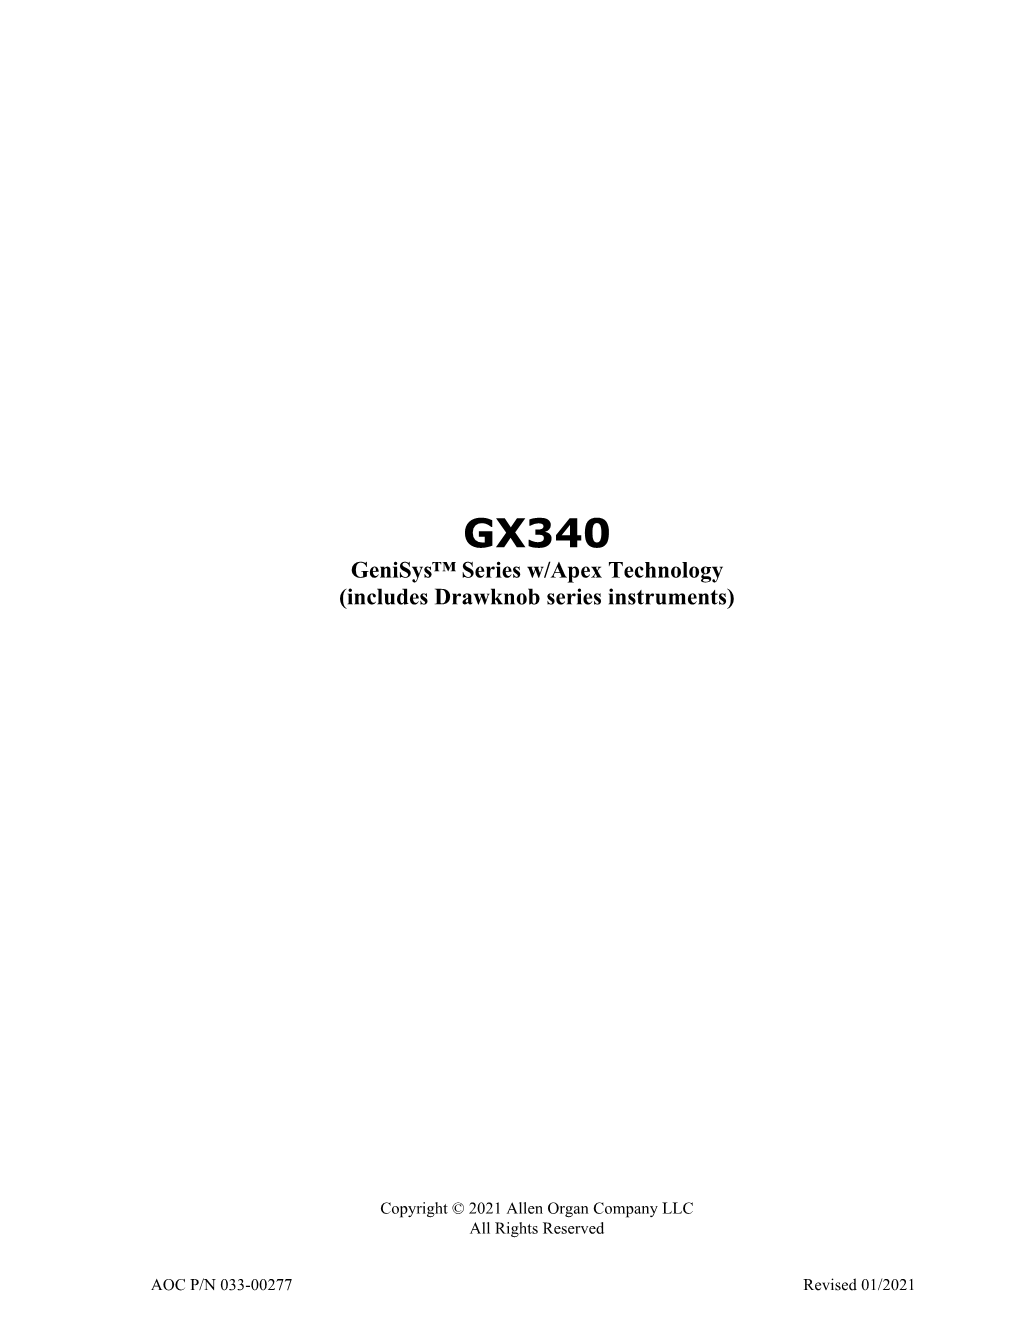 Genisys GX340 Owner's Manual